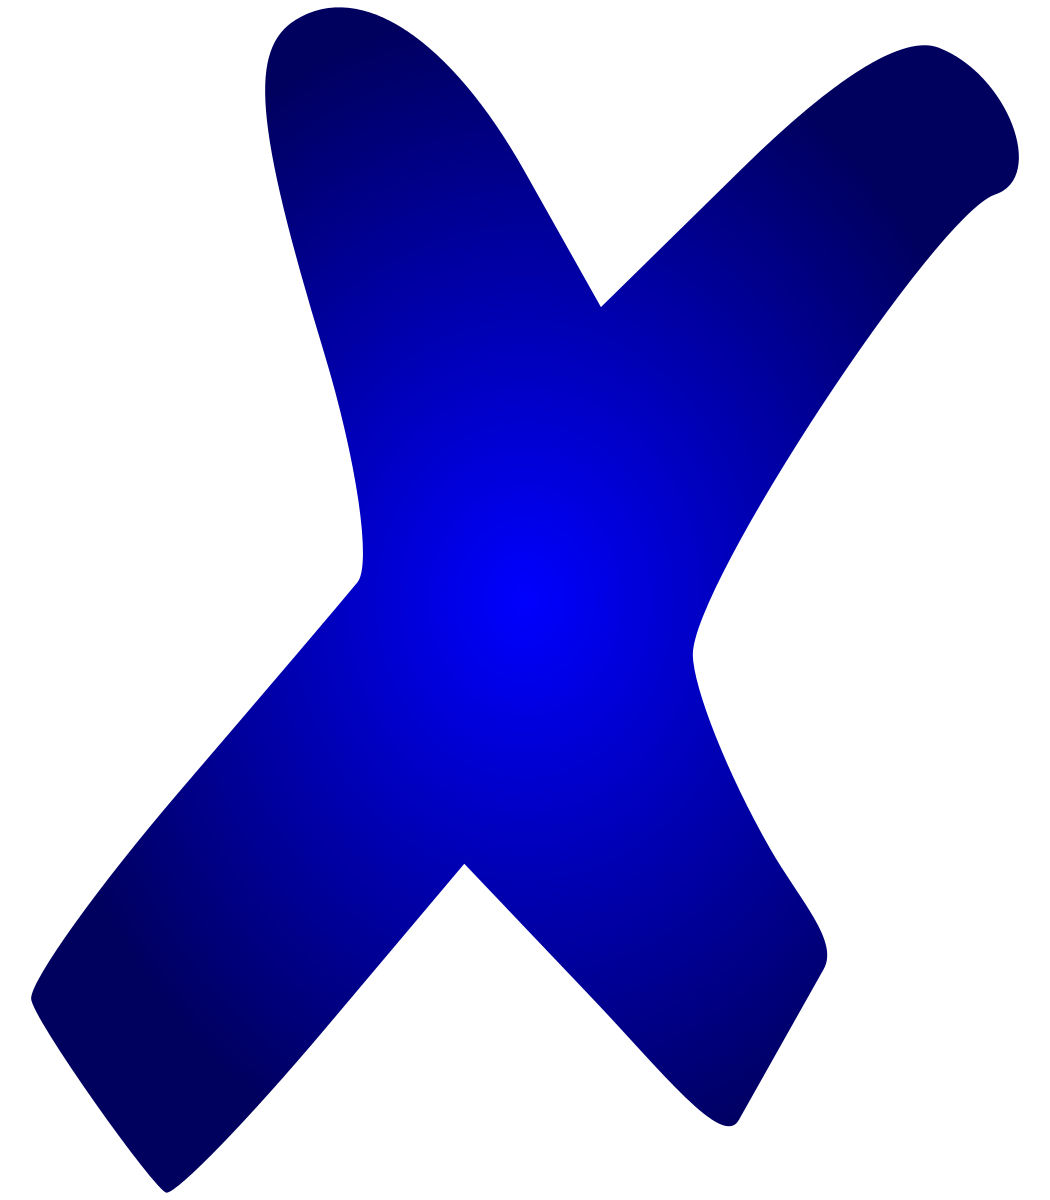 X Mark Png PNG Transparent For Free Download - PngFind